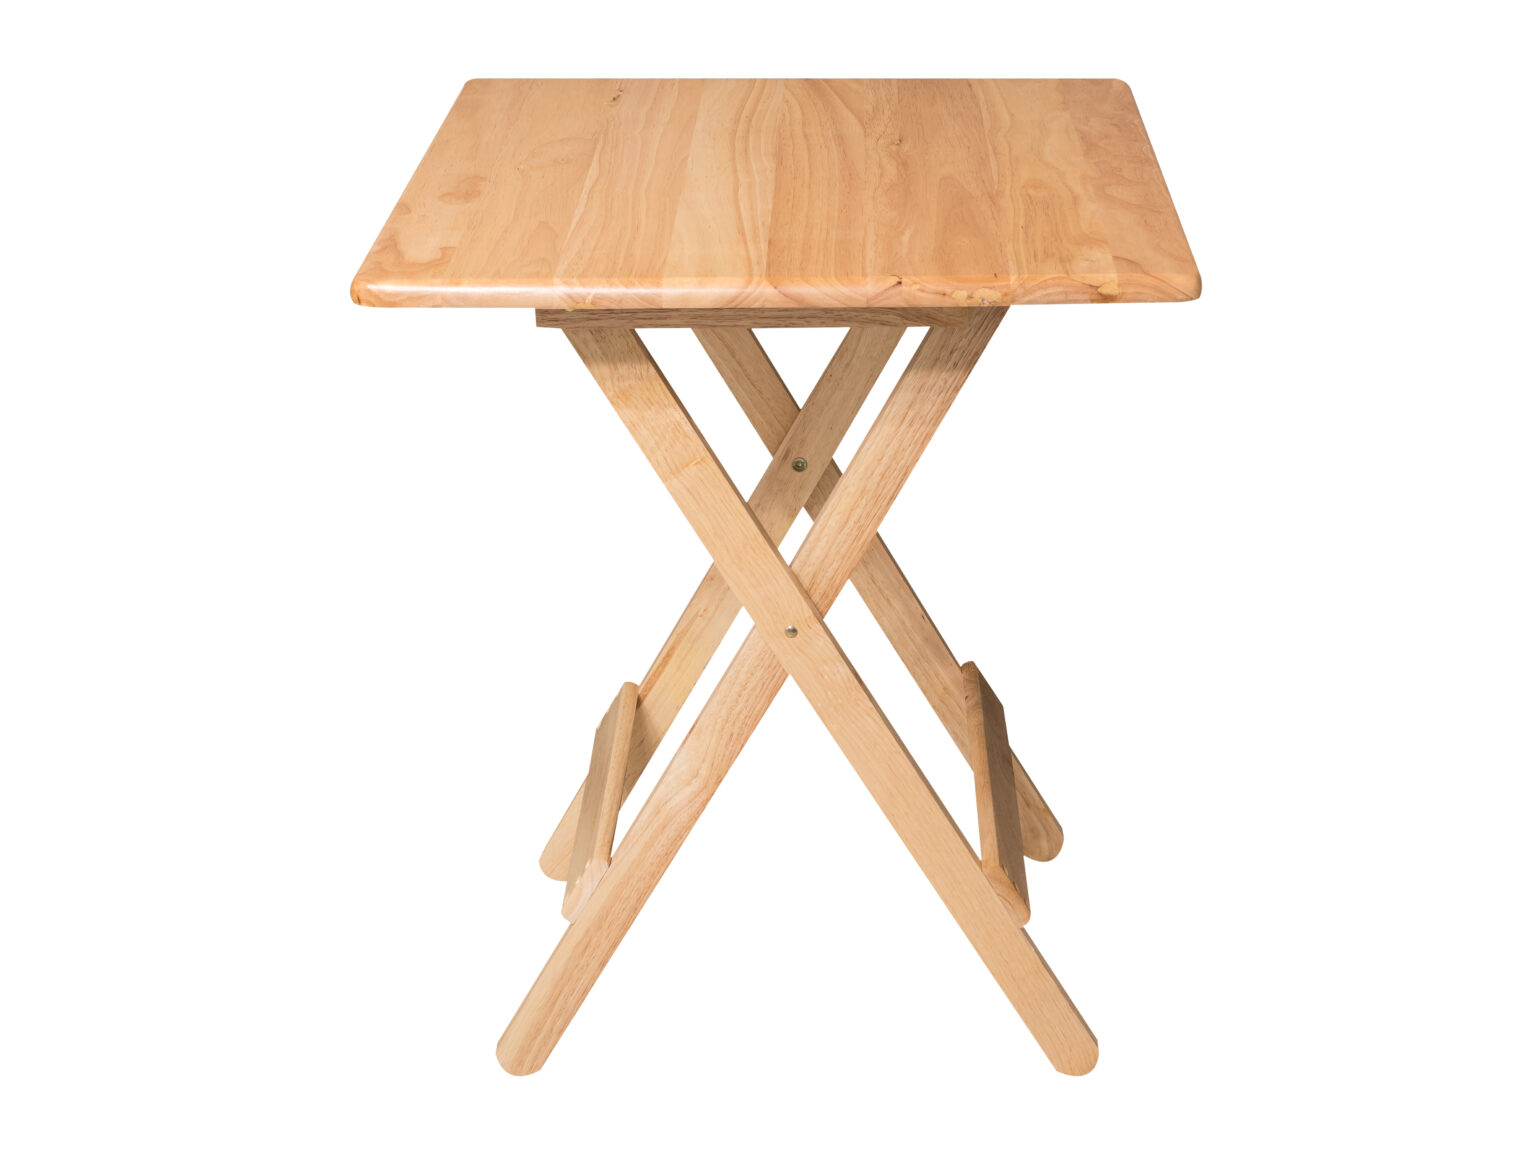 diy-folding-table-how-to-make-one-using-affordable-means-how-to-build-it